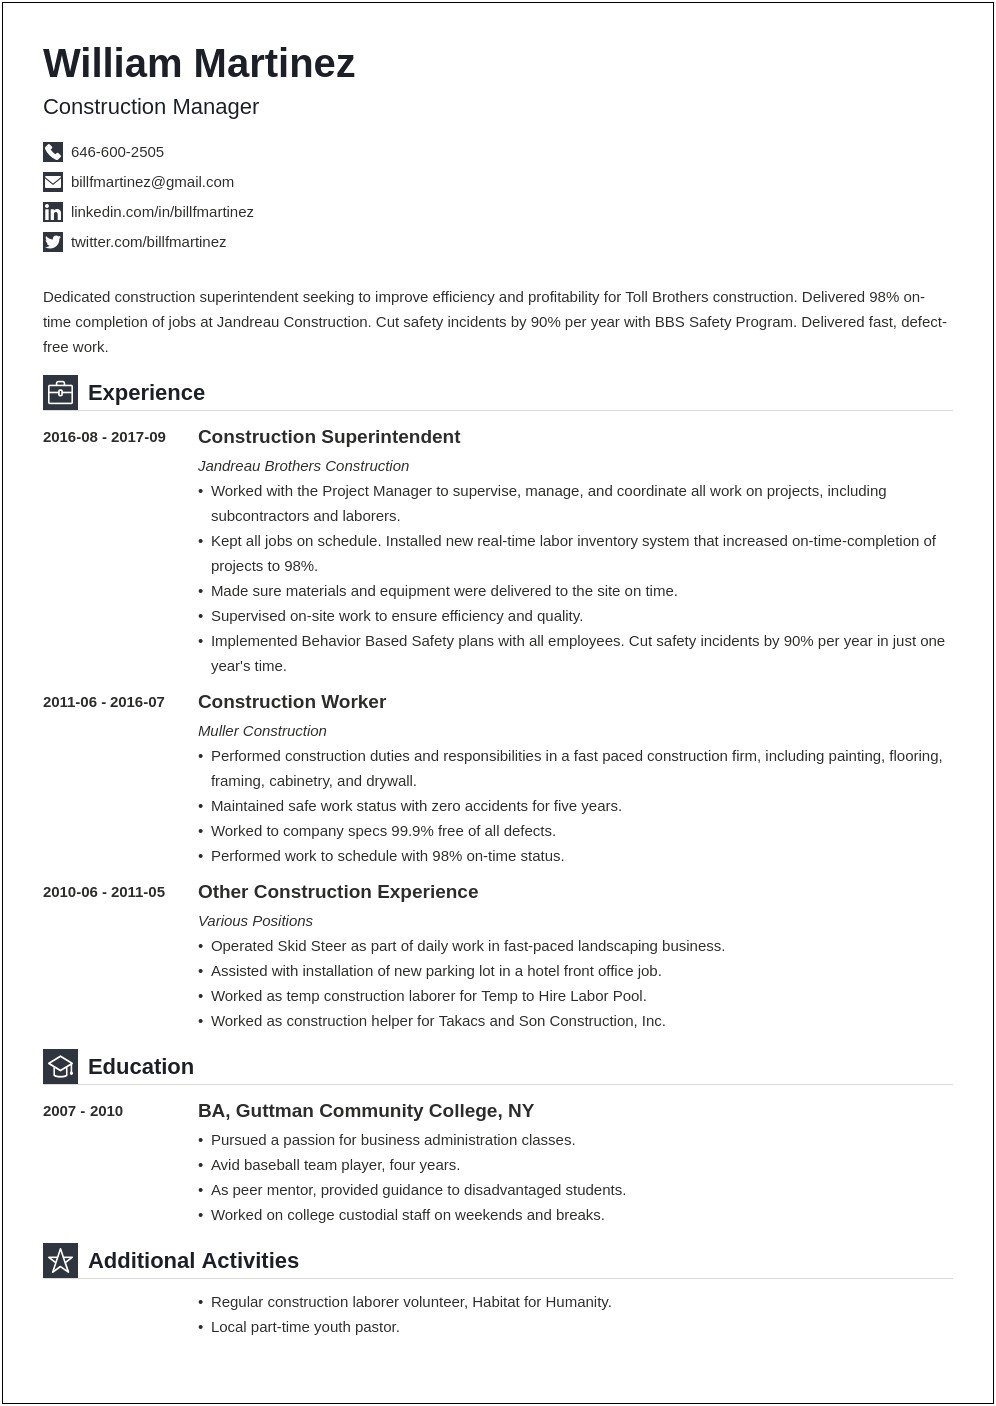 Resume Education Objective References Employment Construction